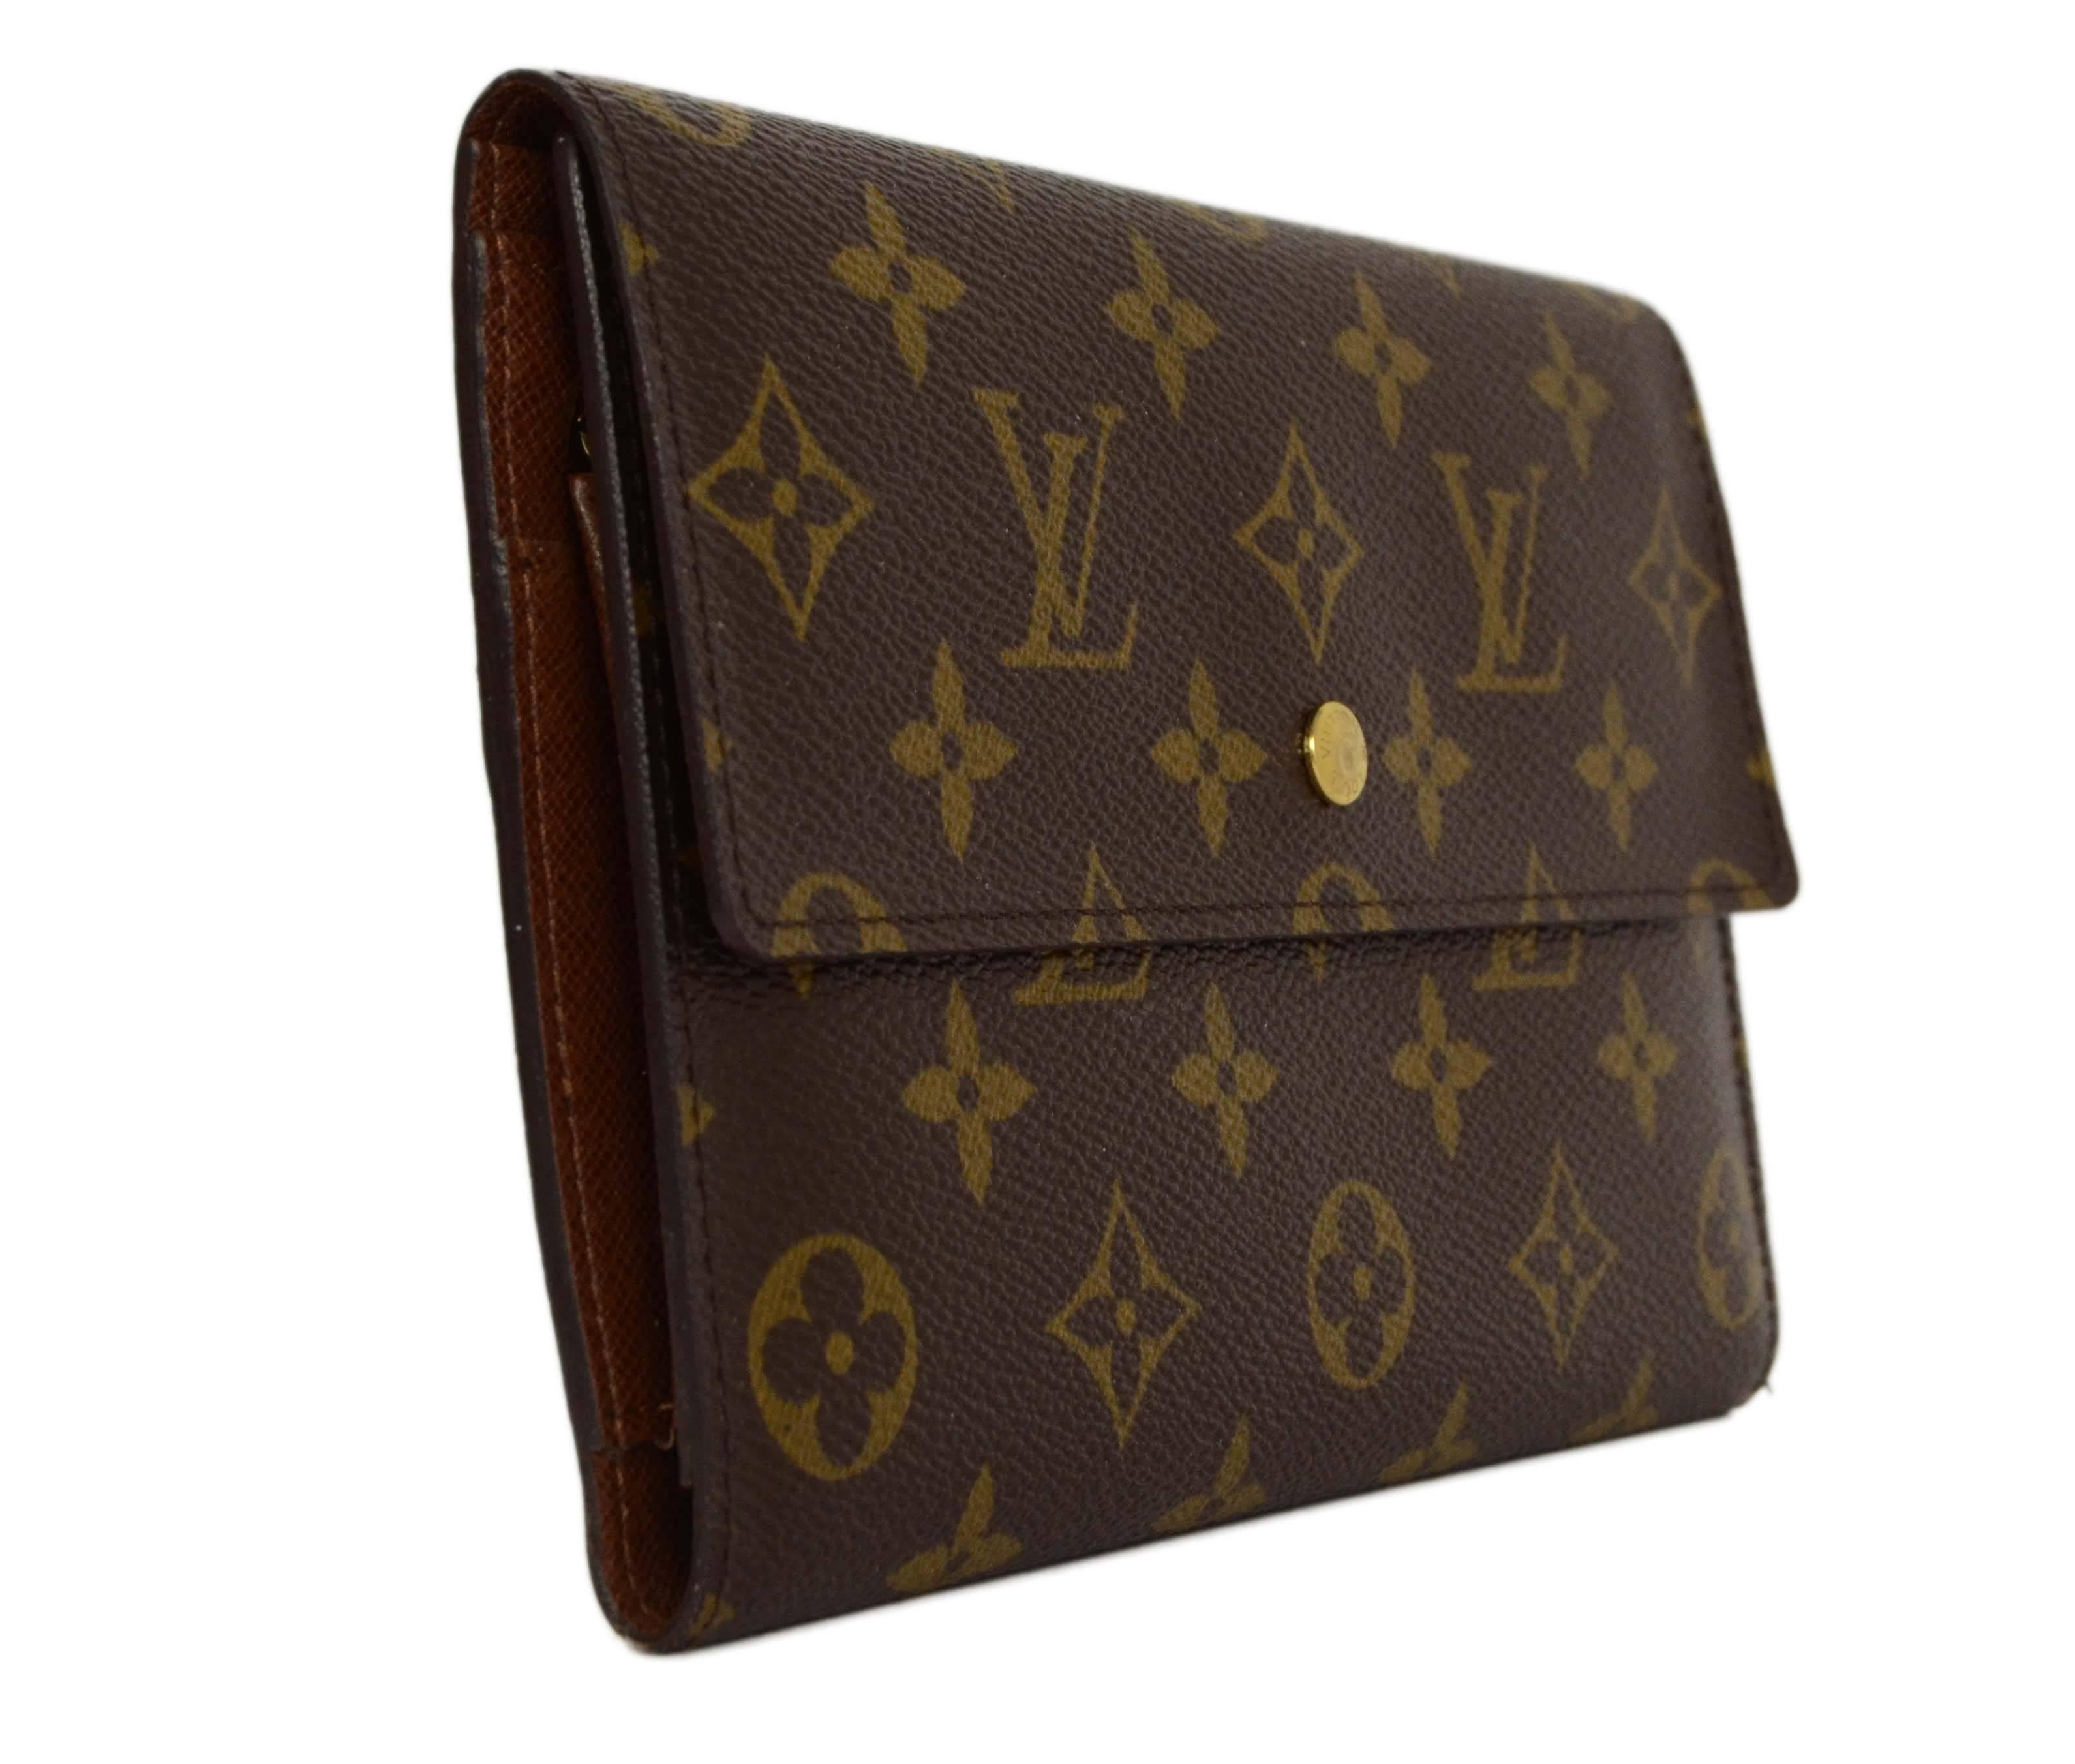 Louis Vuitton Monogram Canvas XL Snap Wallet 
Made In: Spain
Year of Production: 2006
Color: Brown
Hardware: Goldtone
Materials: Coated canvas
Lining: Brown coated canvas
Closure/Opening: Flap top with snap closure
Exterior Pockets: